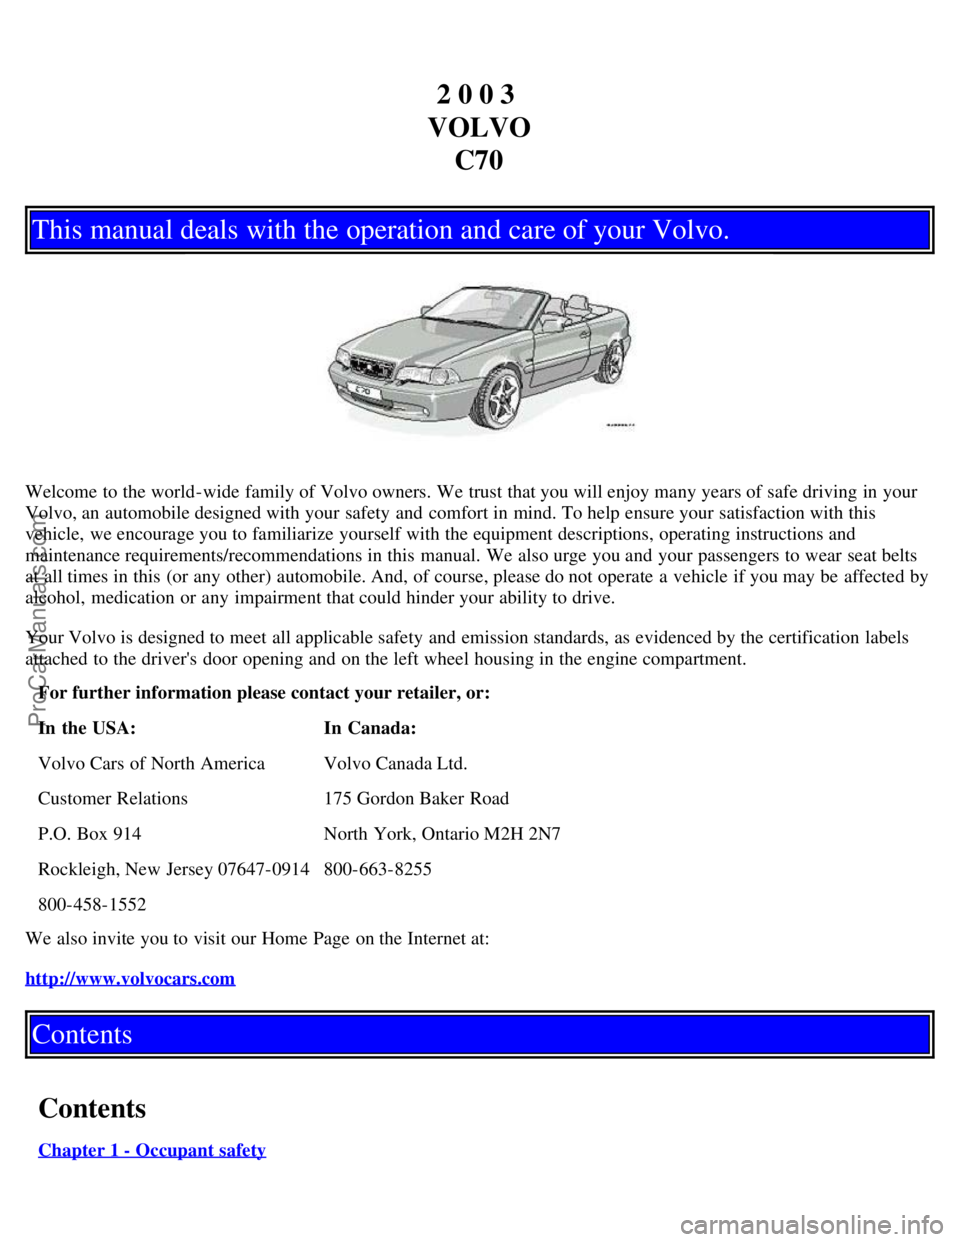 VOLVO C70 2003  Owners Manual 2 0 0 3 
VOLVO C70
This manual deals with the operation and care of your Volvo.
Welcome to the world-wide  family of Volvo owners. We trust that you will enjoy many years of safe driving in your
Volvo